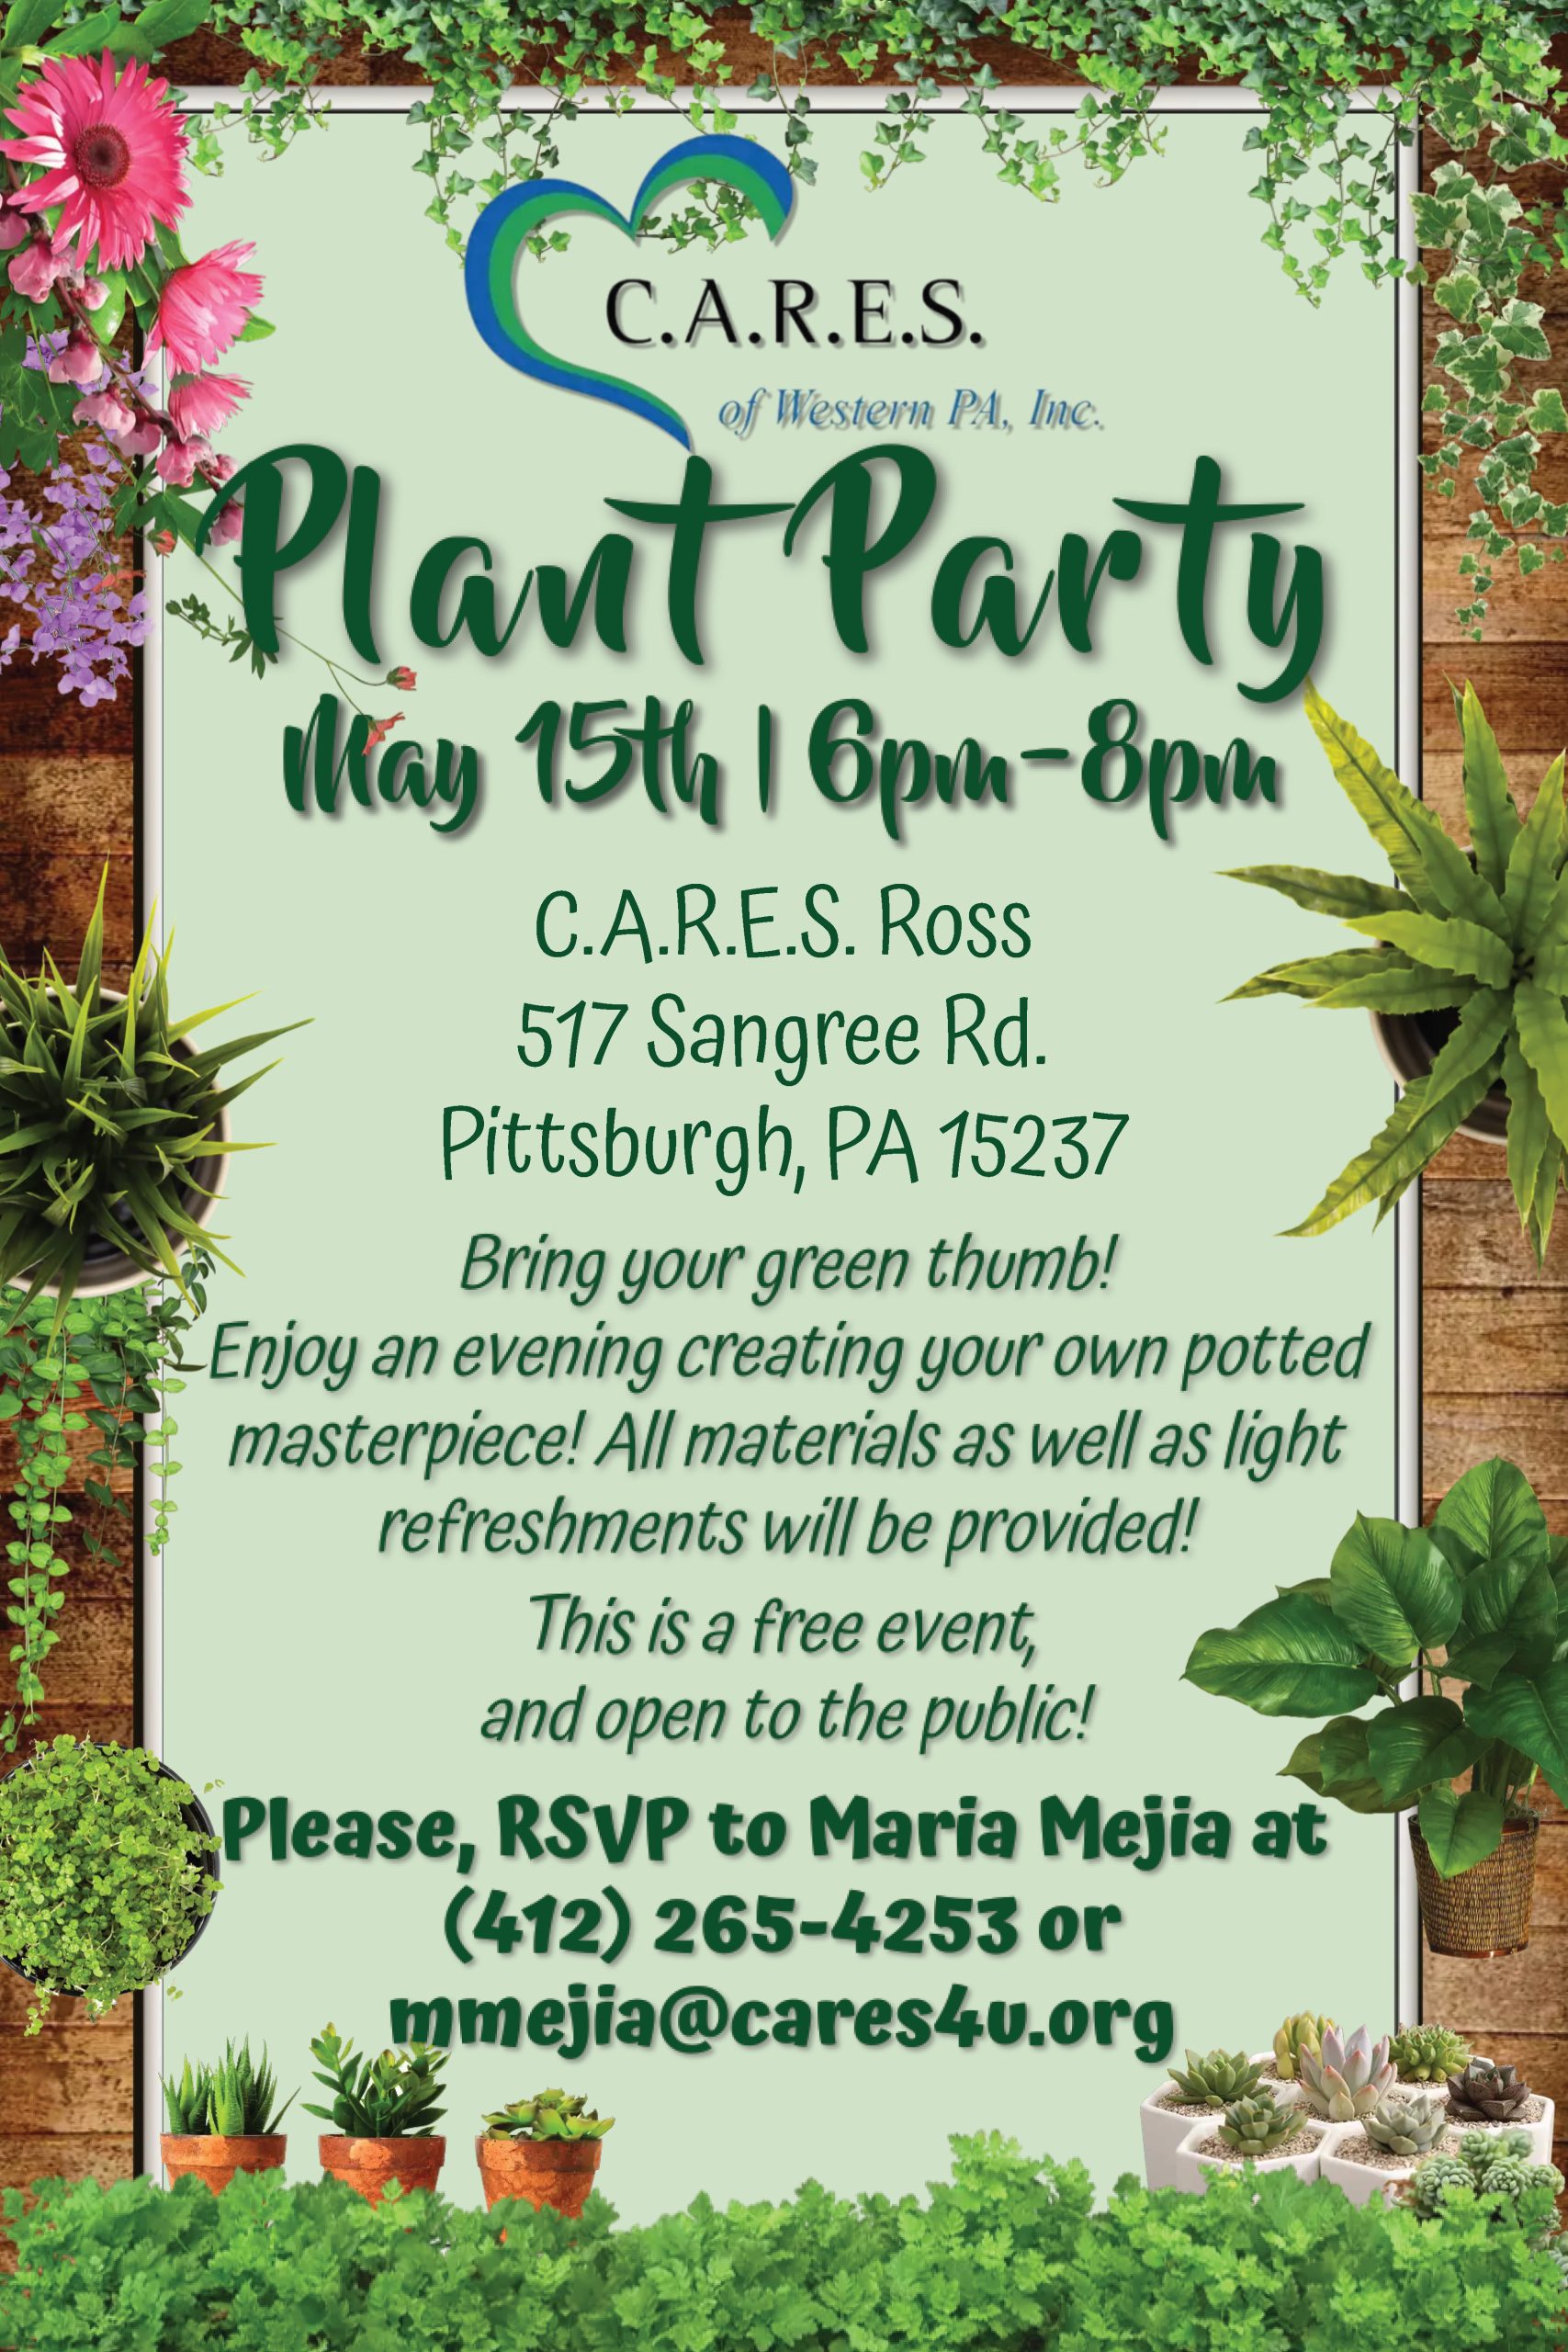 C.A.R.E.S. Plant Party - Pittsburgh 9